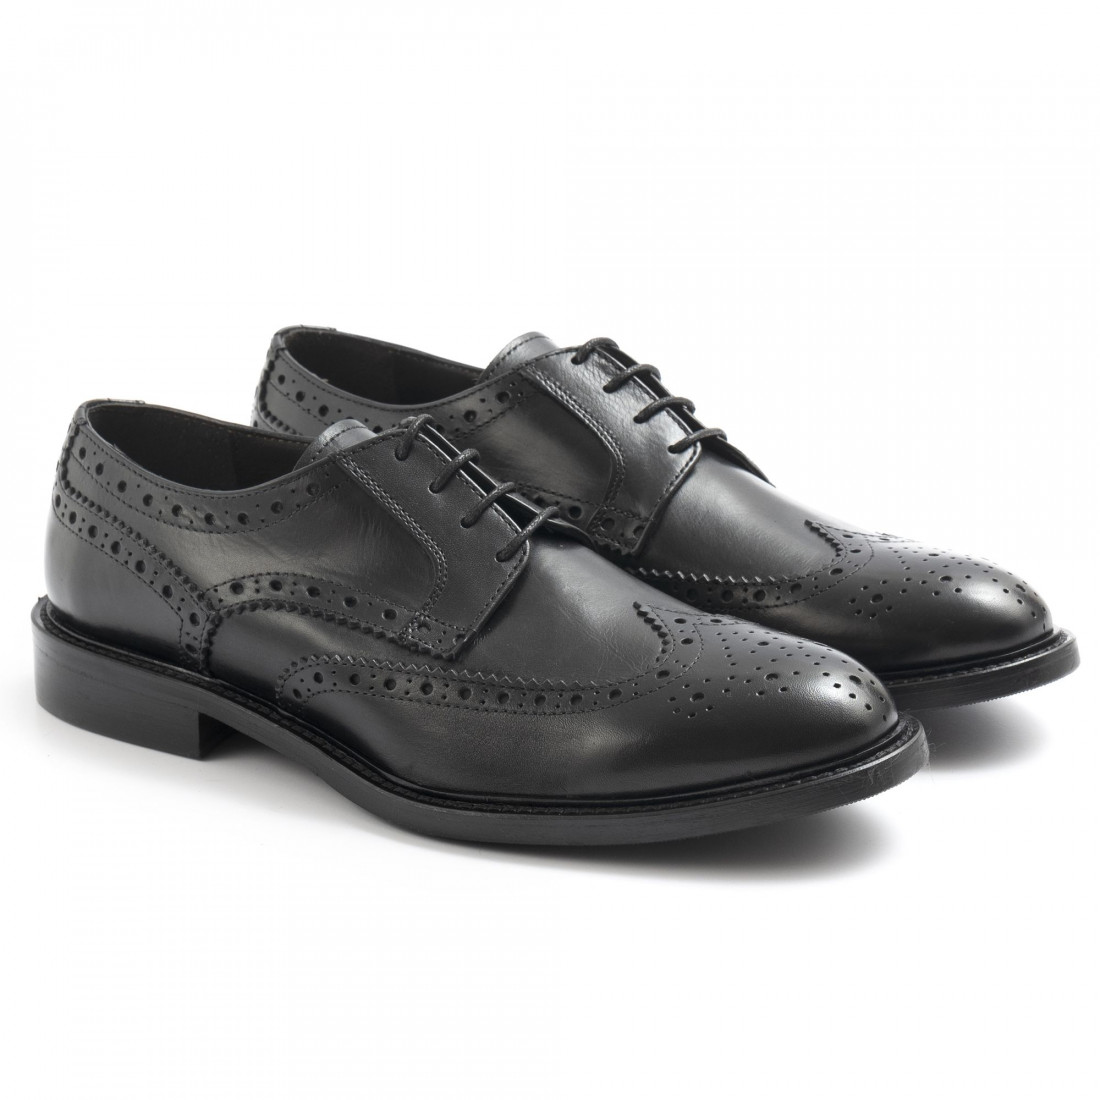 Men's Sangiorgio derby brogue shoes in black leather